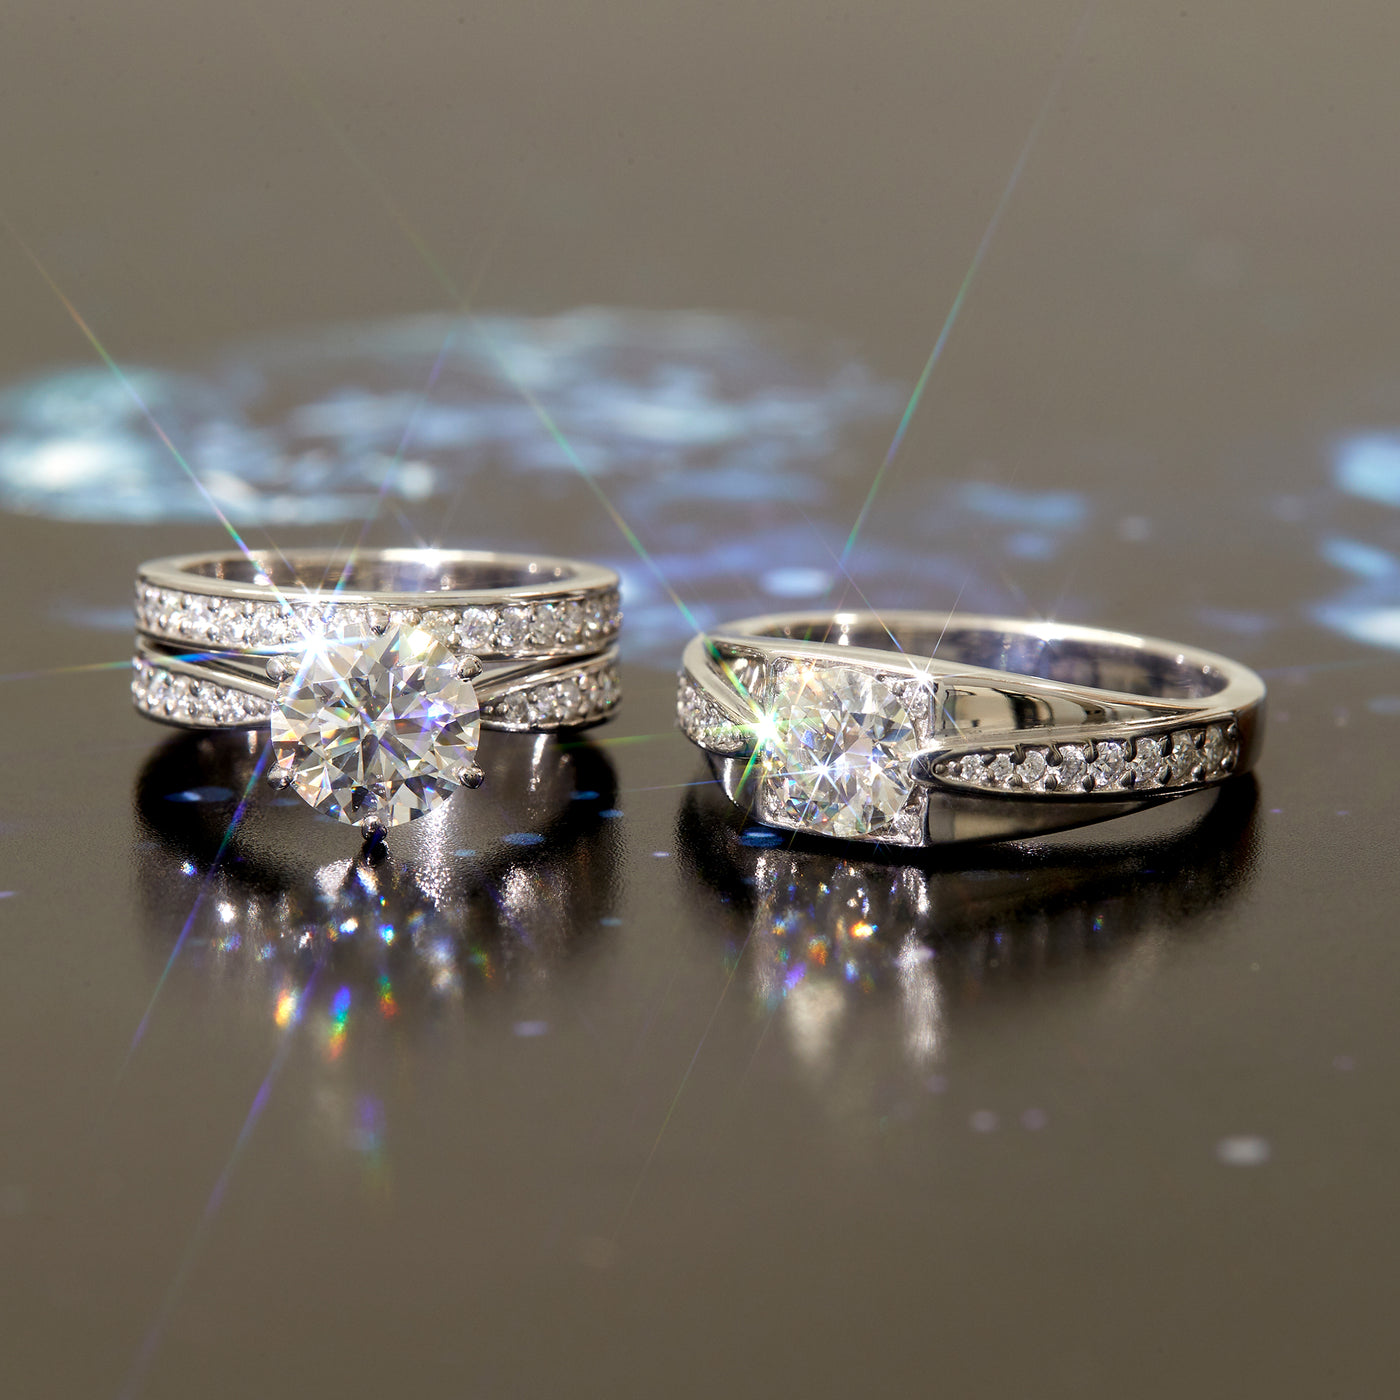 Brilliant Moissanite Wedding Ring Set His and Hers, Sterling Silver